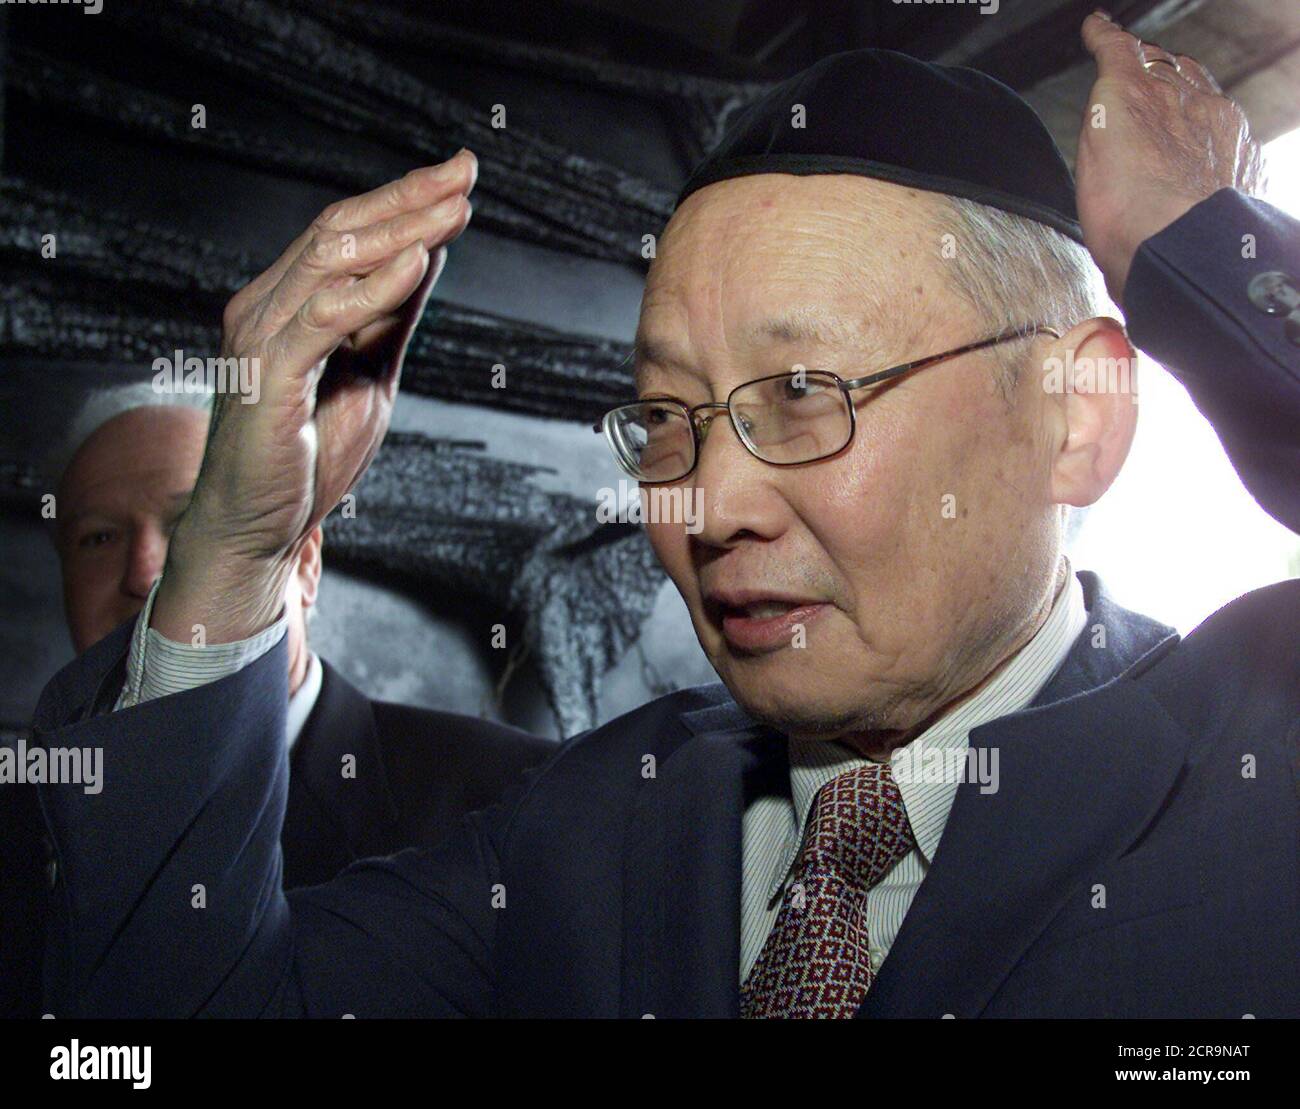 The late Chinese Consul-General in Vienna during 1938-40, Ho Feng Shan's, son Monto places a 'yamulka', or Jewish skullcap, on his head as he enters the 'Hall of Remembrances' in the Yad Vashem Holocaust Memorial complex during a ceremony in Jerusalem January 23, 2001. Monto, from Pittsburgh, PA and Taiwan, and his sister Manli received the 'Righteous Among The Nations' award on behalf of their father who saved hundreds if not thousands of Jews in Austria during the Nazi Holocaust. Ho Feng Shan issued exit visas to Shanghai to all Jews requesting them in order that they could leave Austria. Sh Stock Photo